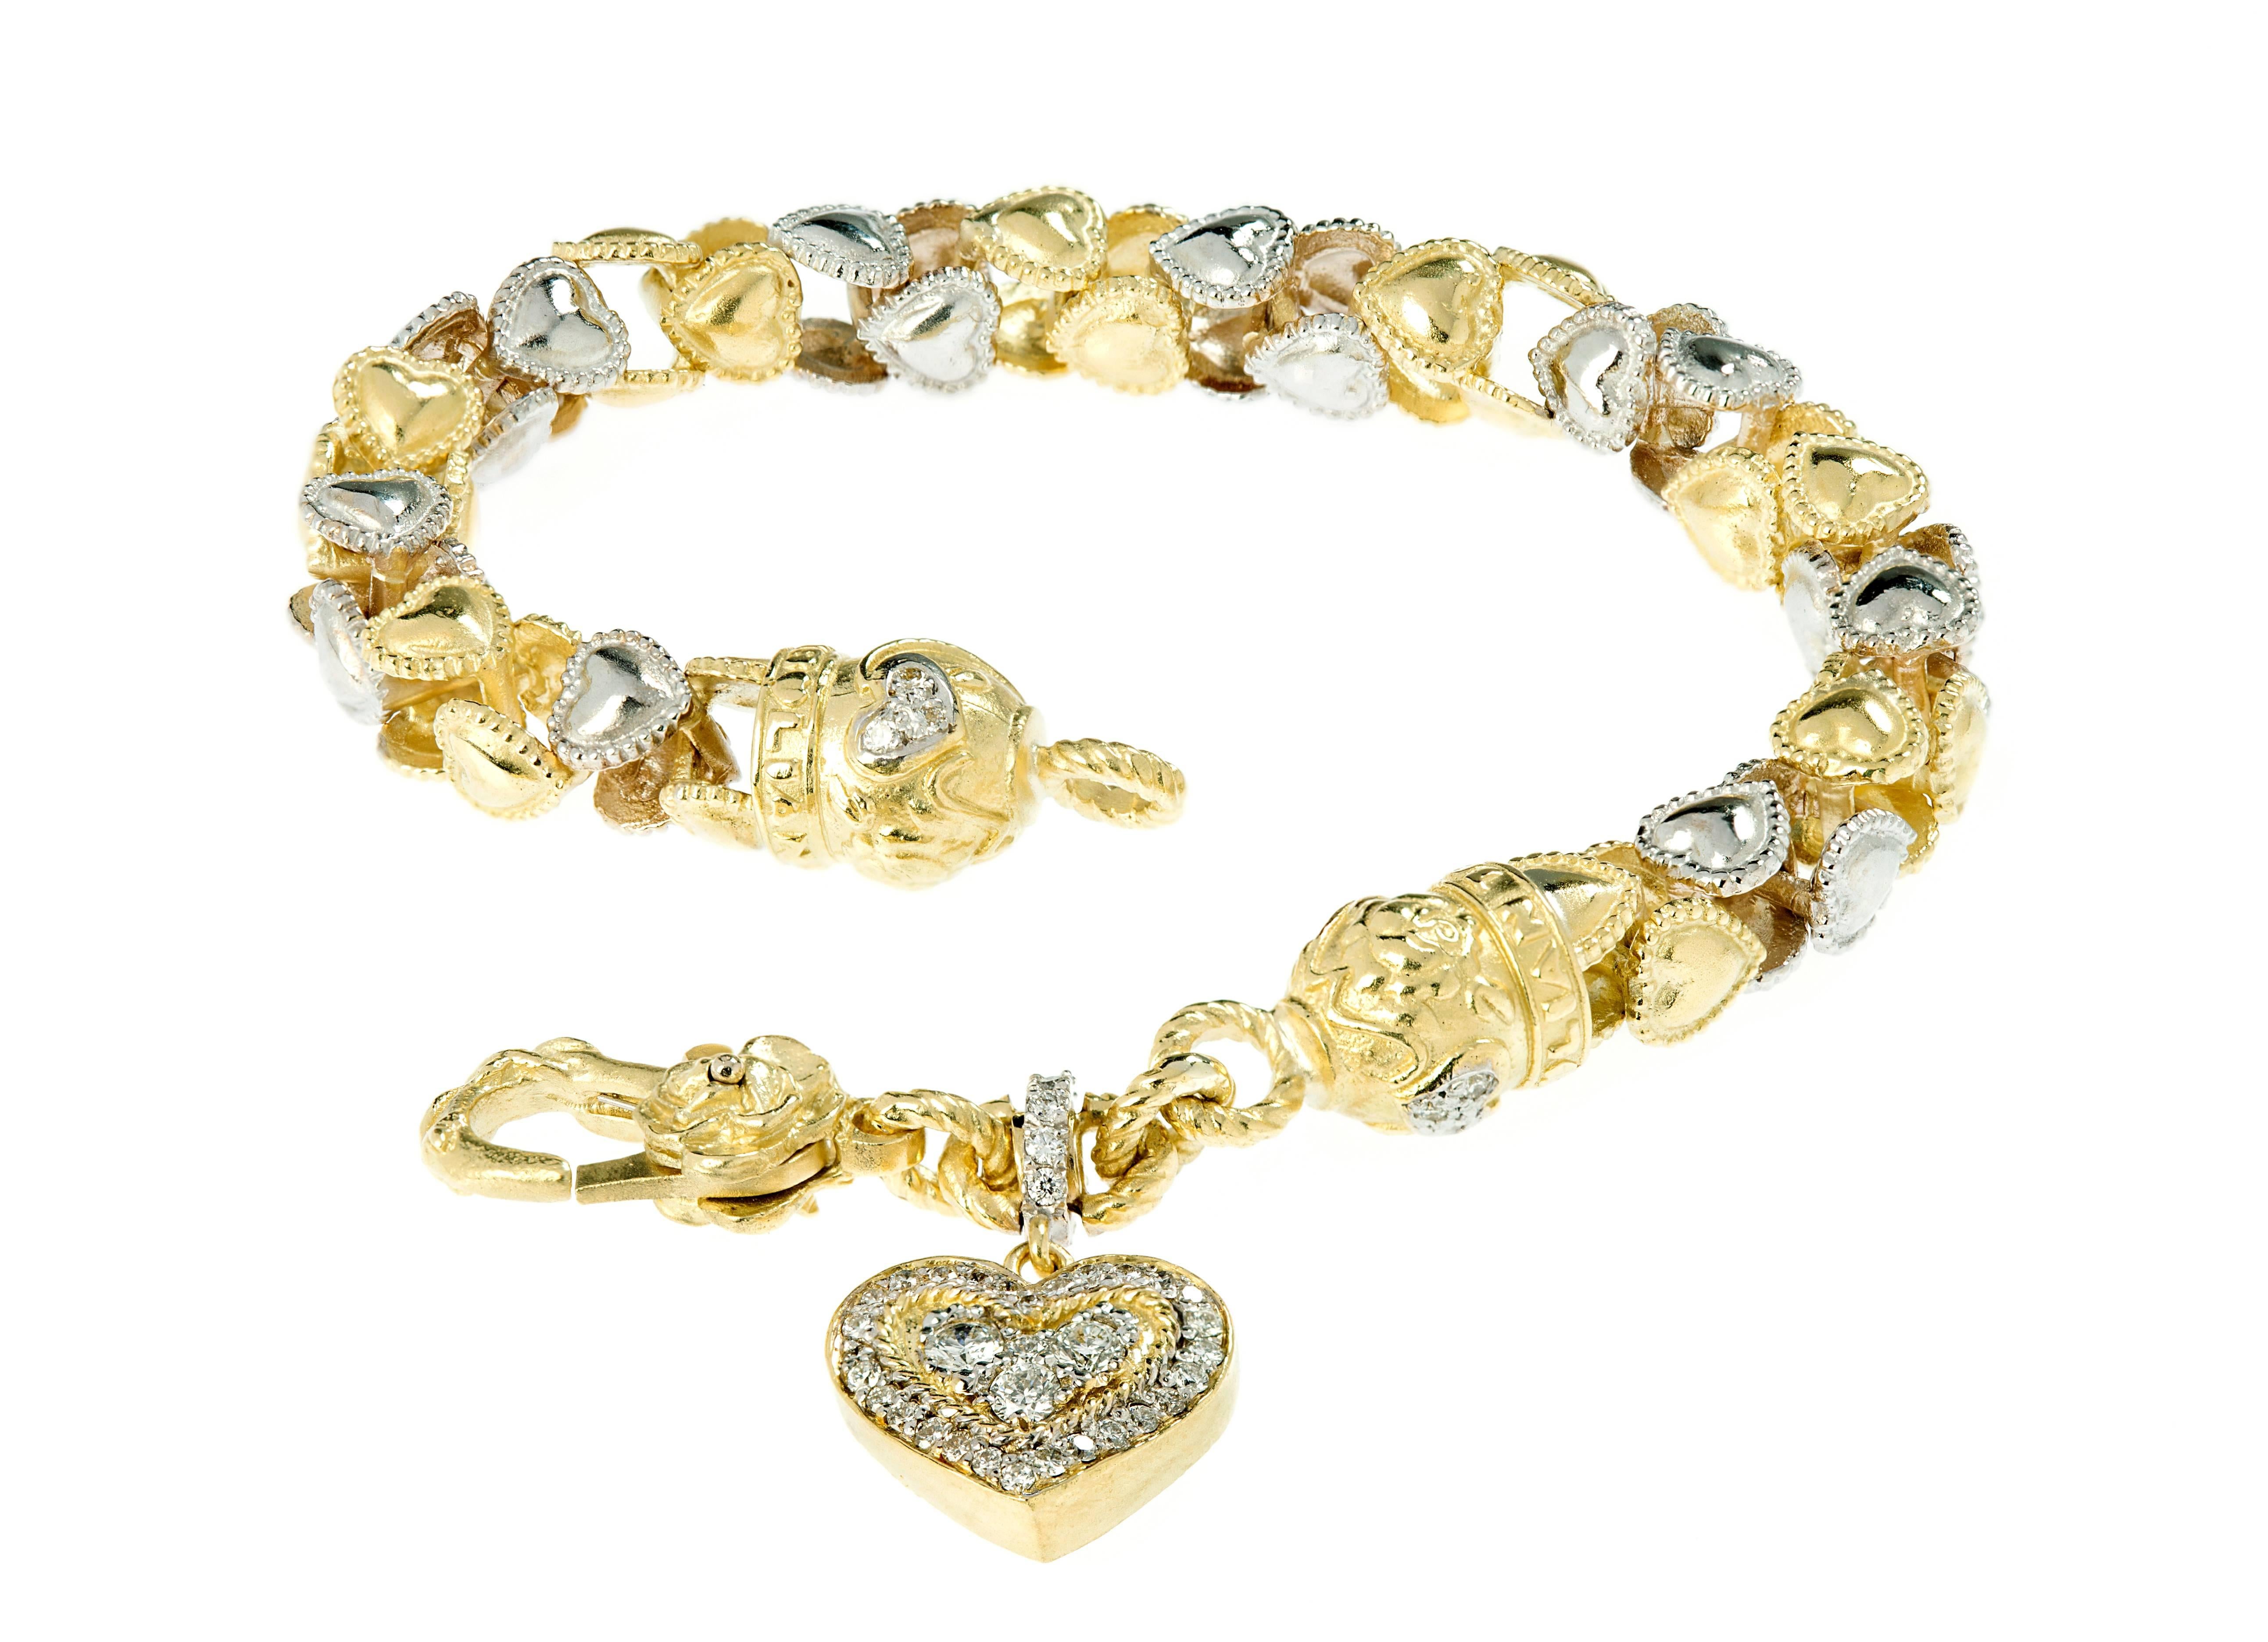 Stambolian Two-Tone Gold Heart Link Bracelet with Dangling Diamond Heart

This is the 